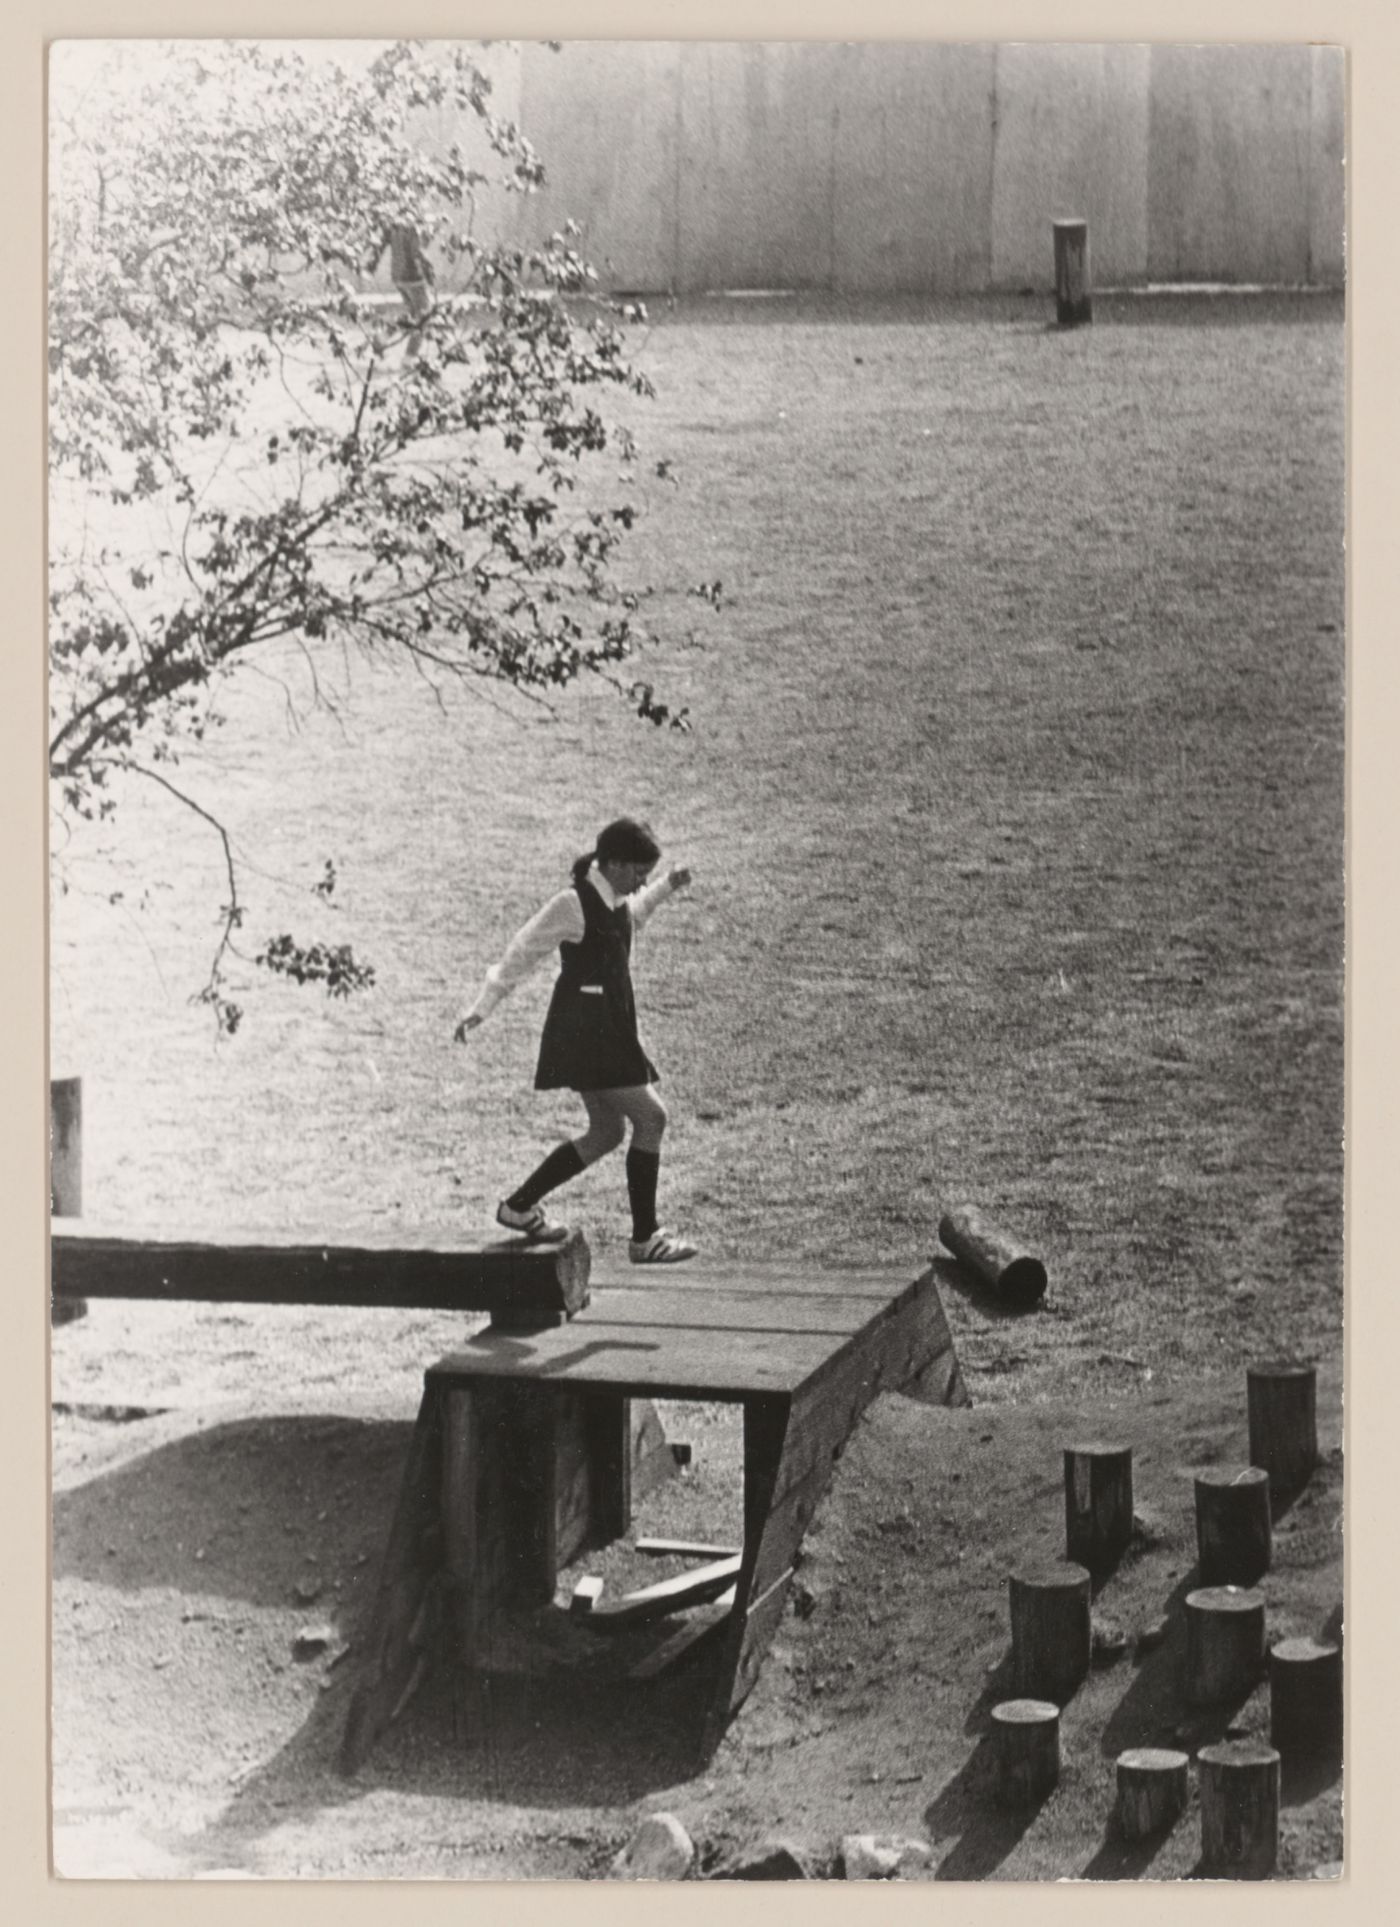 View of child playing in Talmud Torah School Playground, Vancouver, British Columbia